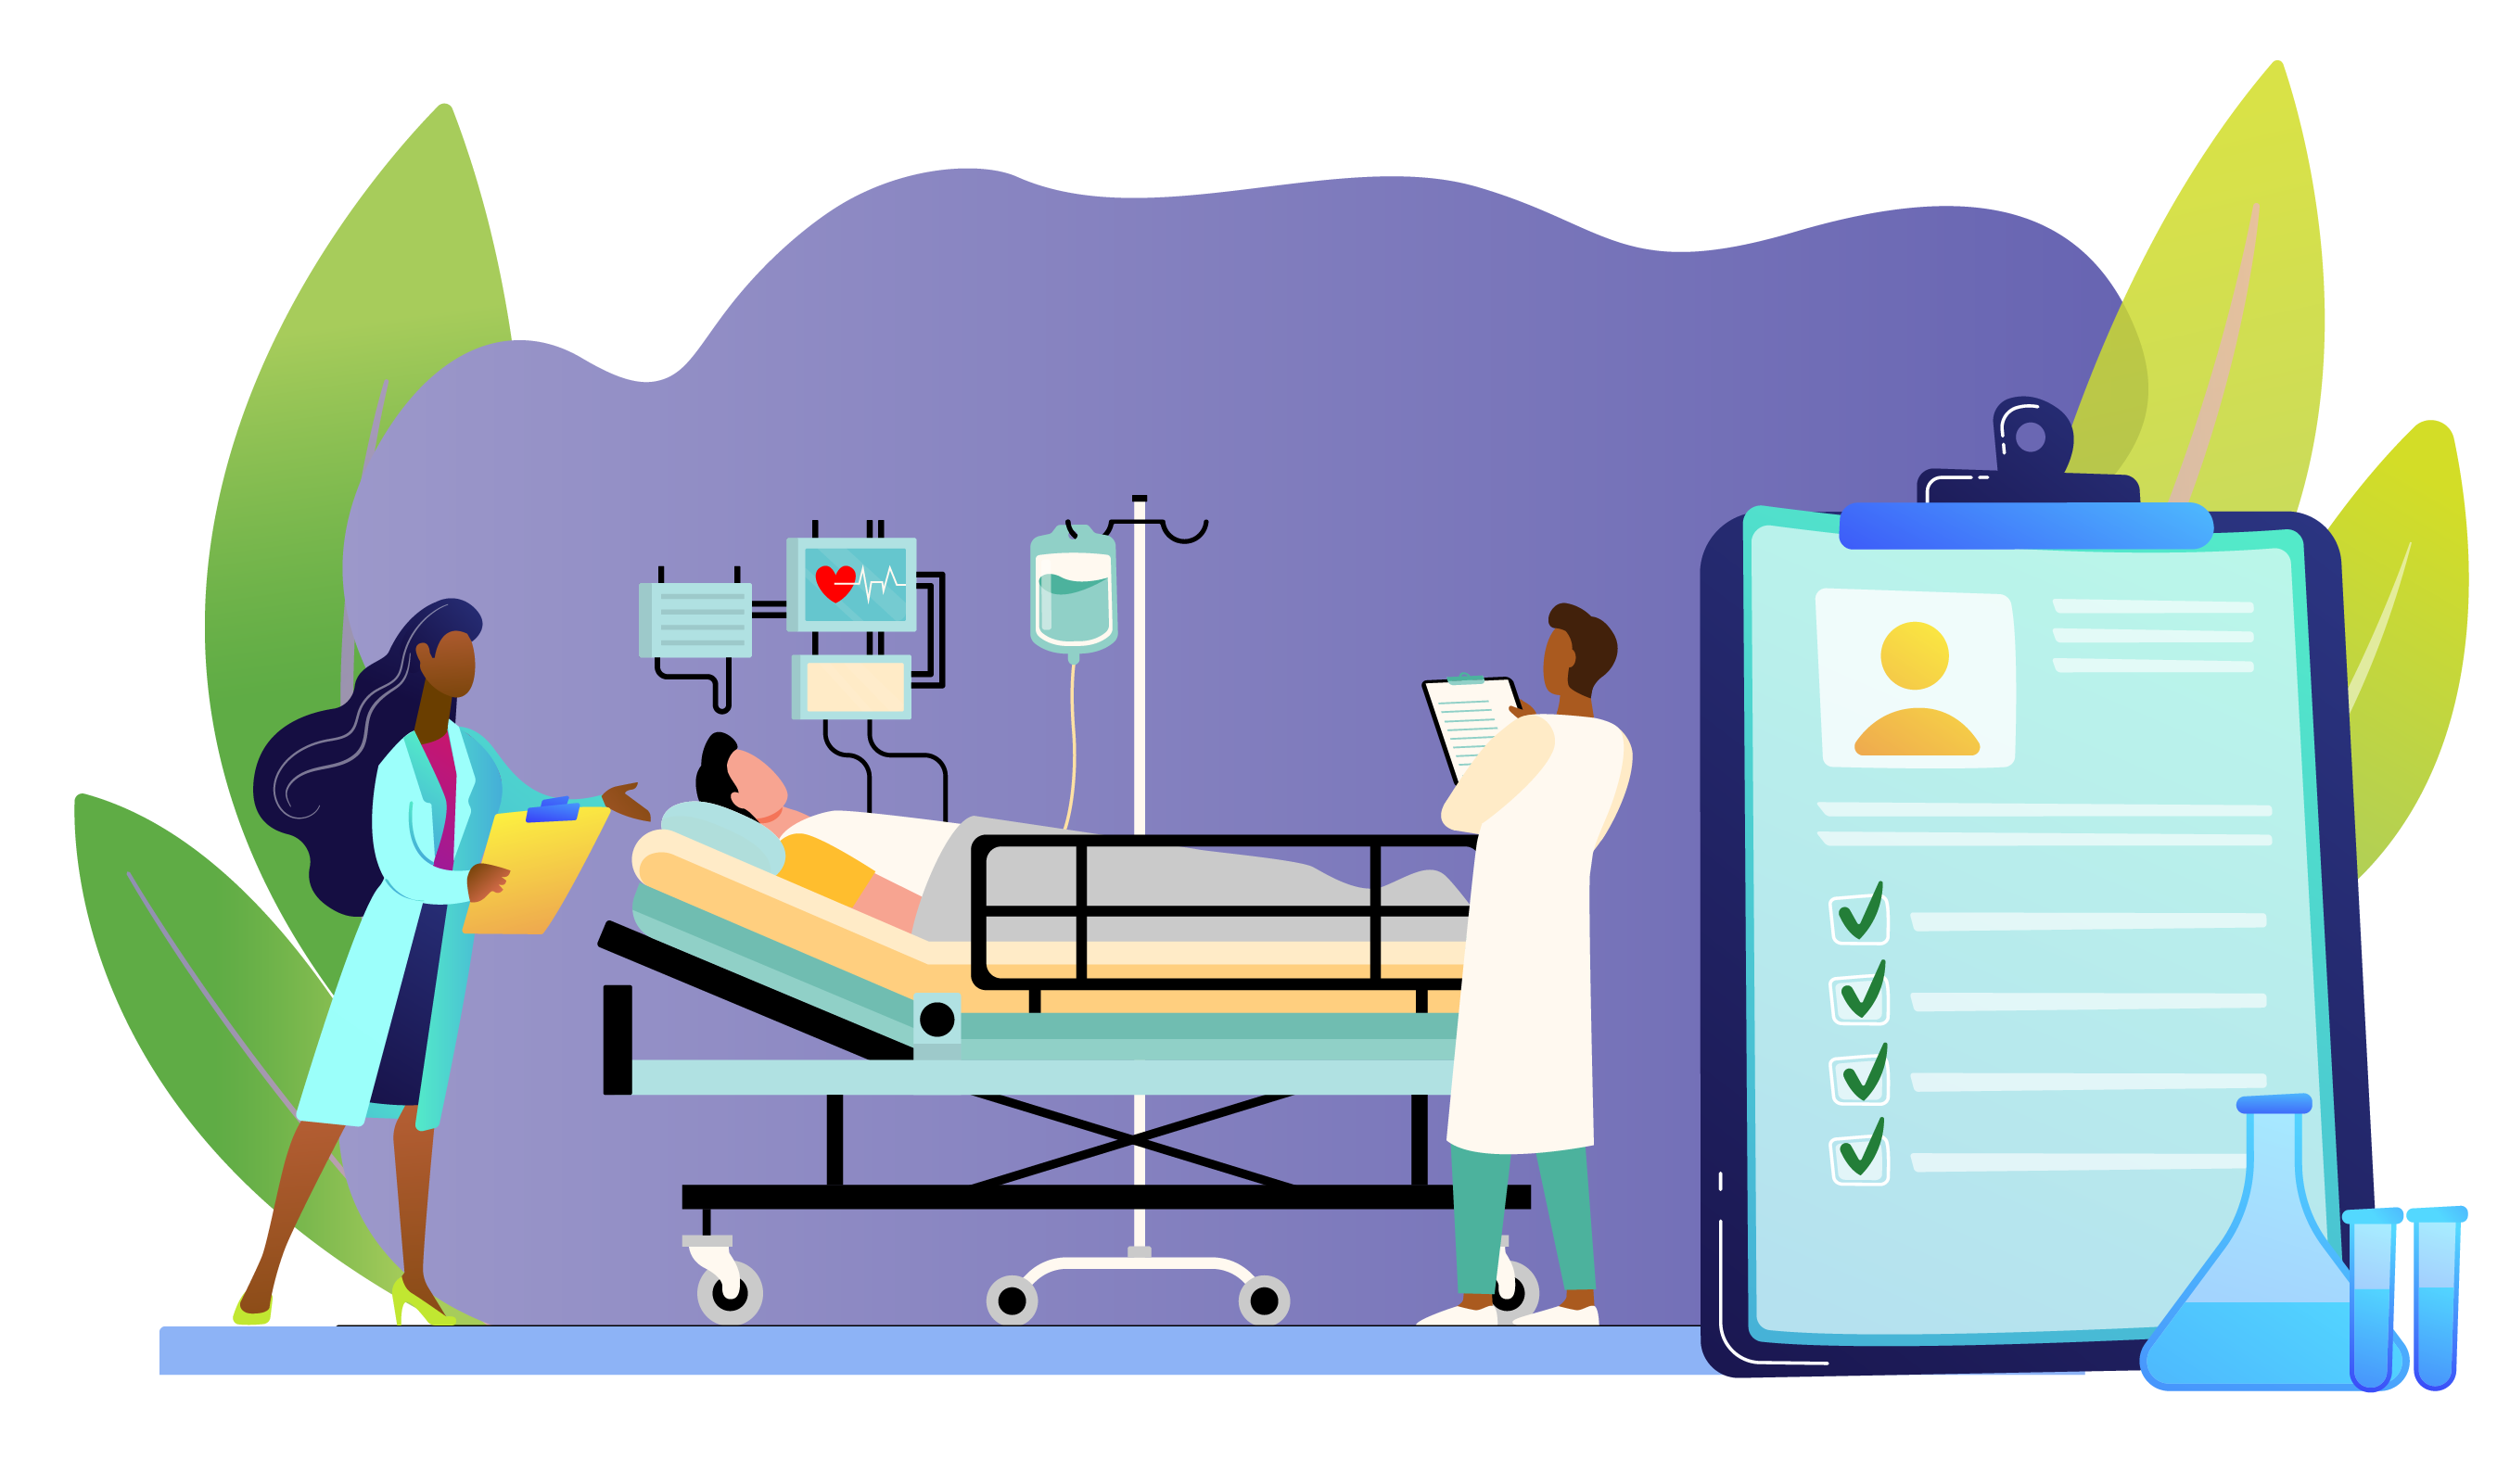 Illustration of Two Doctors Attending to a Patient in a Hospital Bed in the Emergency Department